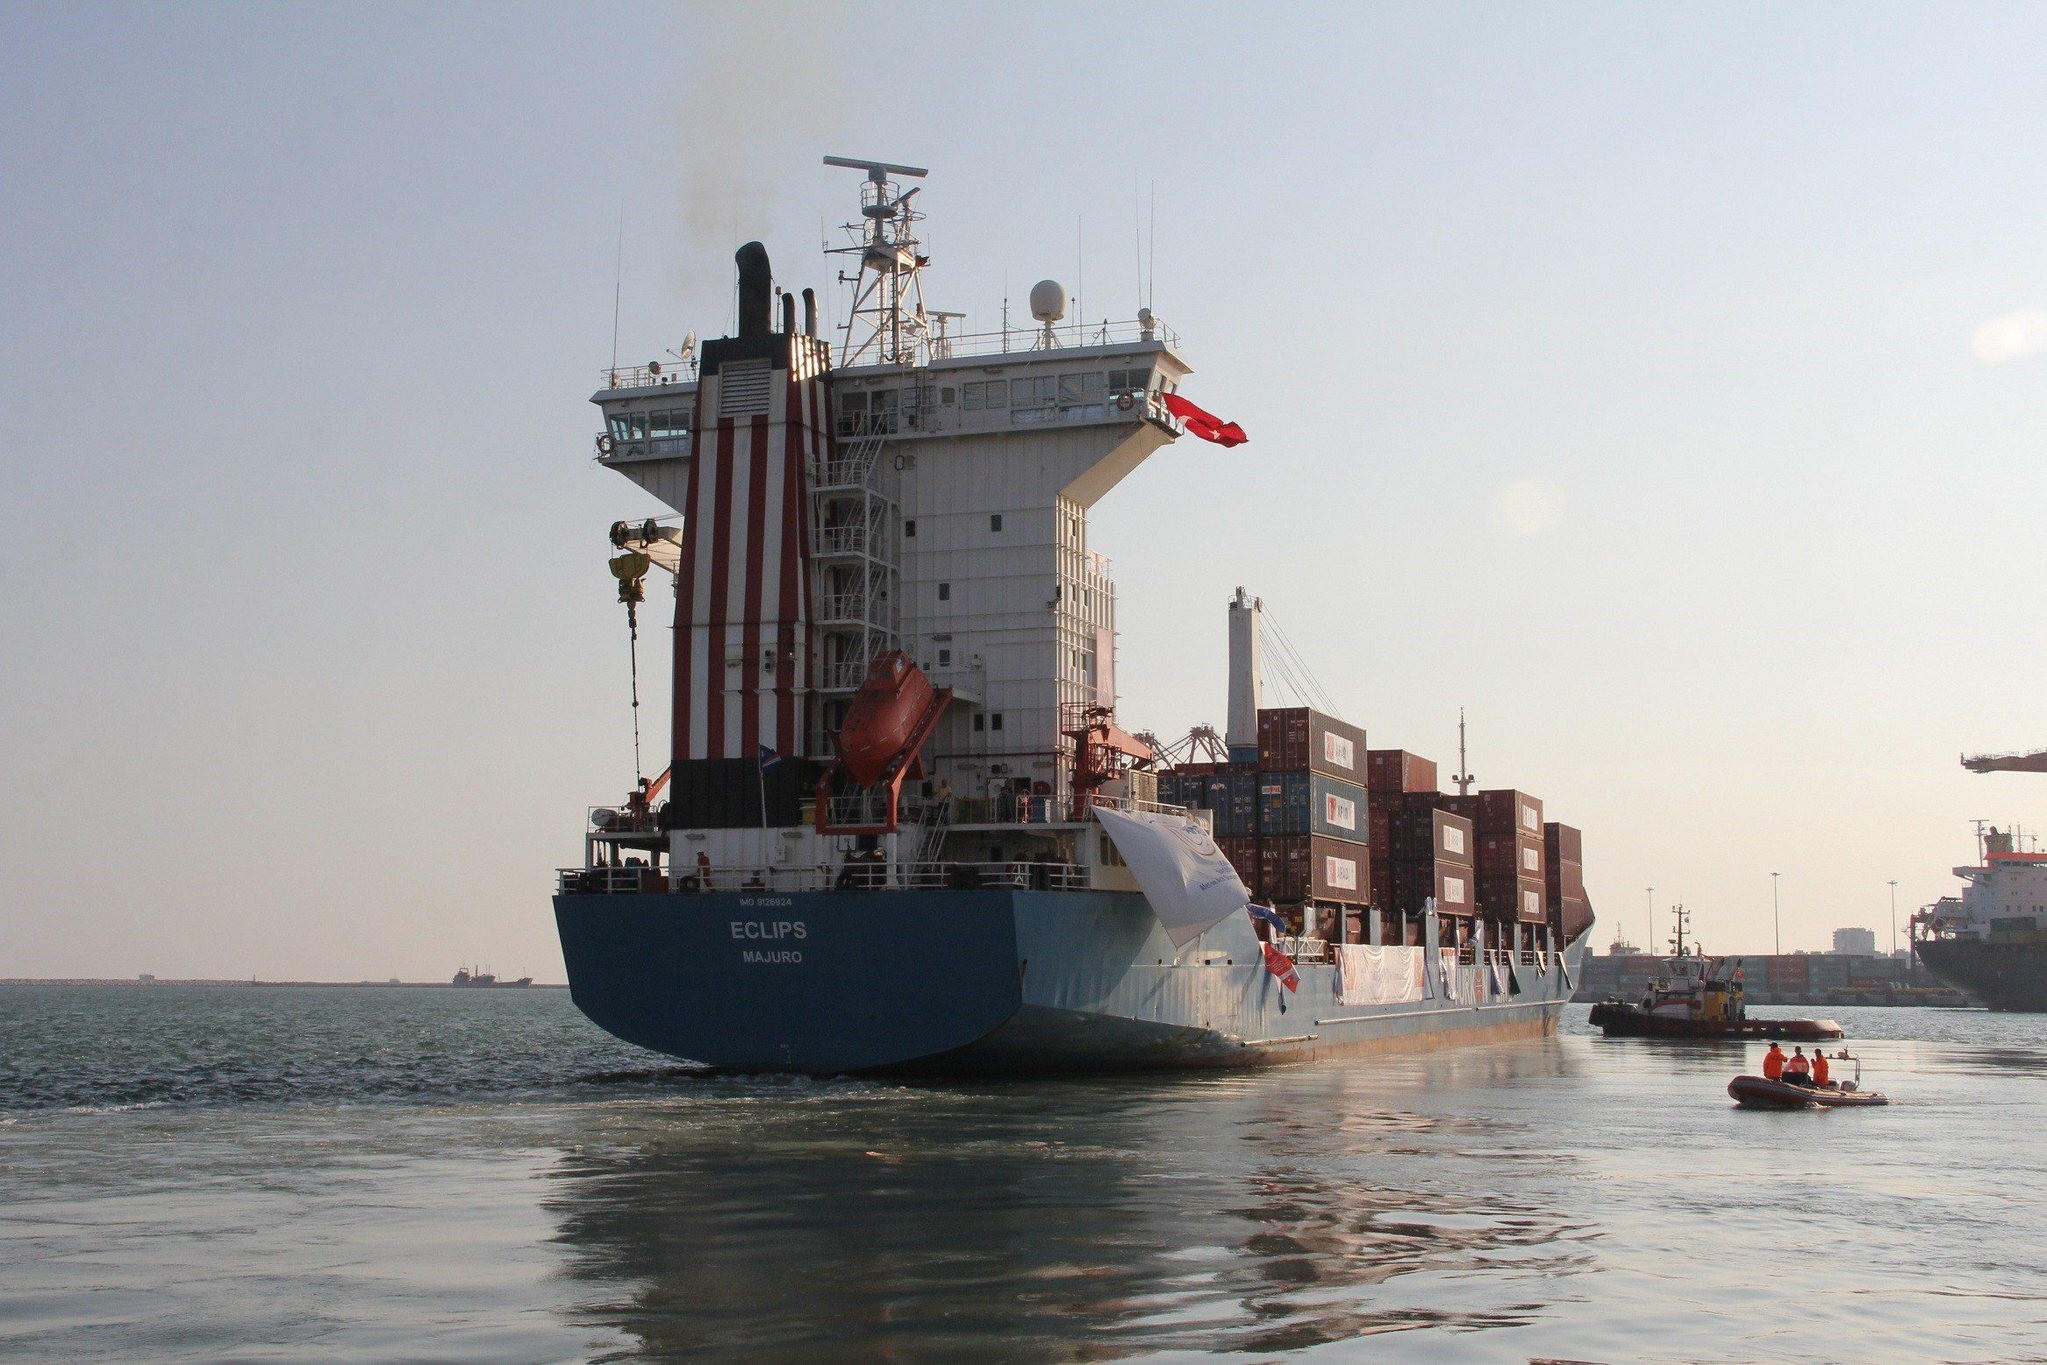 The ship left the port of Mersin Sunday and is scheduled to arrive in Gaza before Eid al-Fitr.